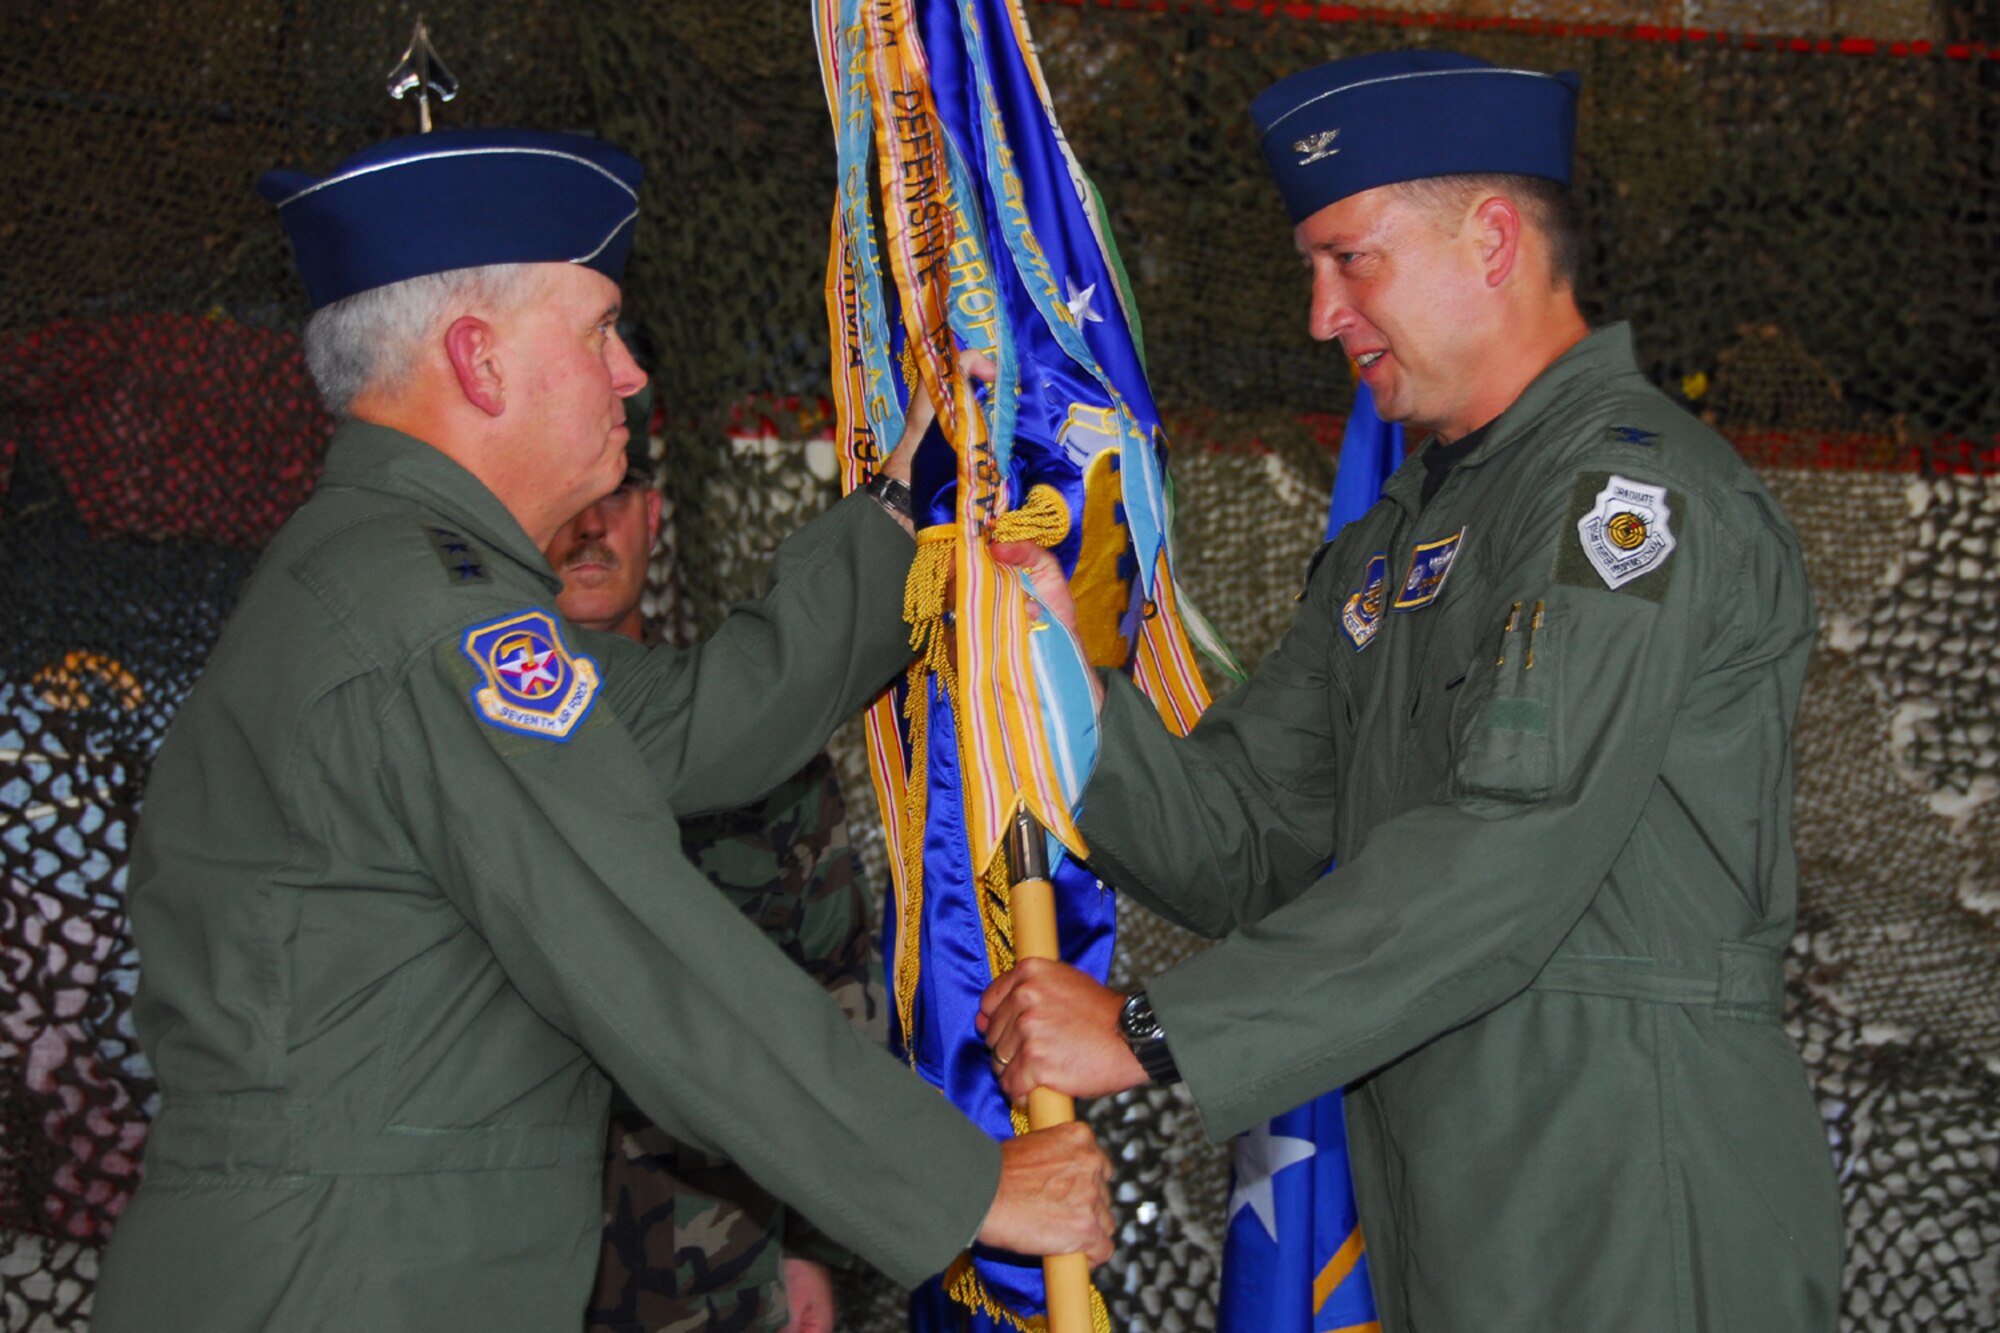 OSAN AIR BASE, Republic of Korea -- Lieutenant General Steven G. Wood, Commander 7th Air Force, passes the 51st Fighter Wing guidon to Colonel Jon Norman as he takes over as Commander of the 51st Fighter Wing during the change of command ceremony today.  (U.S. Air Force photo by Airman 1st Class Chad Strohmeyere)